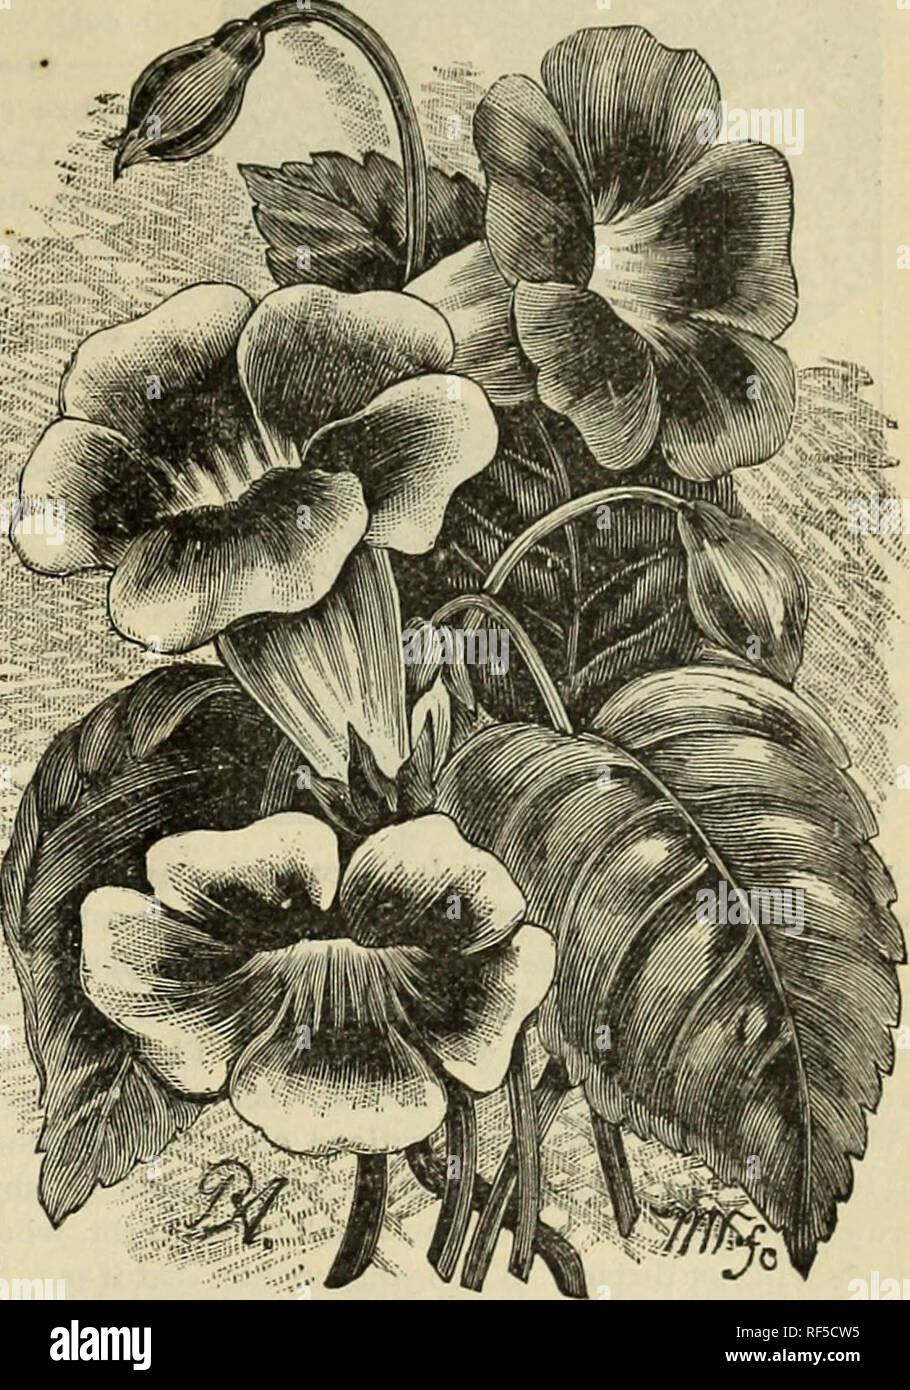 . Plants, seeds, bulbs, and flowers : 26th year 1898. Nursery stock New Hampshire Keene Catalogs; Plants, Ornamental Catalogs; Flowers Seeds Catalogs; Shrubs Catalogs; Vegetables Seeds Catalogs; Fruit Catalogs. ELLIS BROTHERS' CATALOGUE. [ l Gloxinia Crassifolia. A charming- class of summer-blooming bulbs, which suc- ceed with ordinary care. They should be grown in a moderately shady place, as the sun burns the foliage when wet, making brown spots ap- pear. They are easily grown, and bloom con- stantly until autumn, when they should be al- lowed to die down and the pots kept dry in some warm p Stock Photo